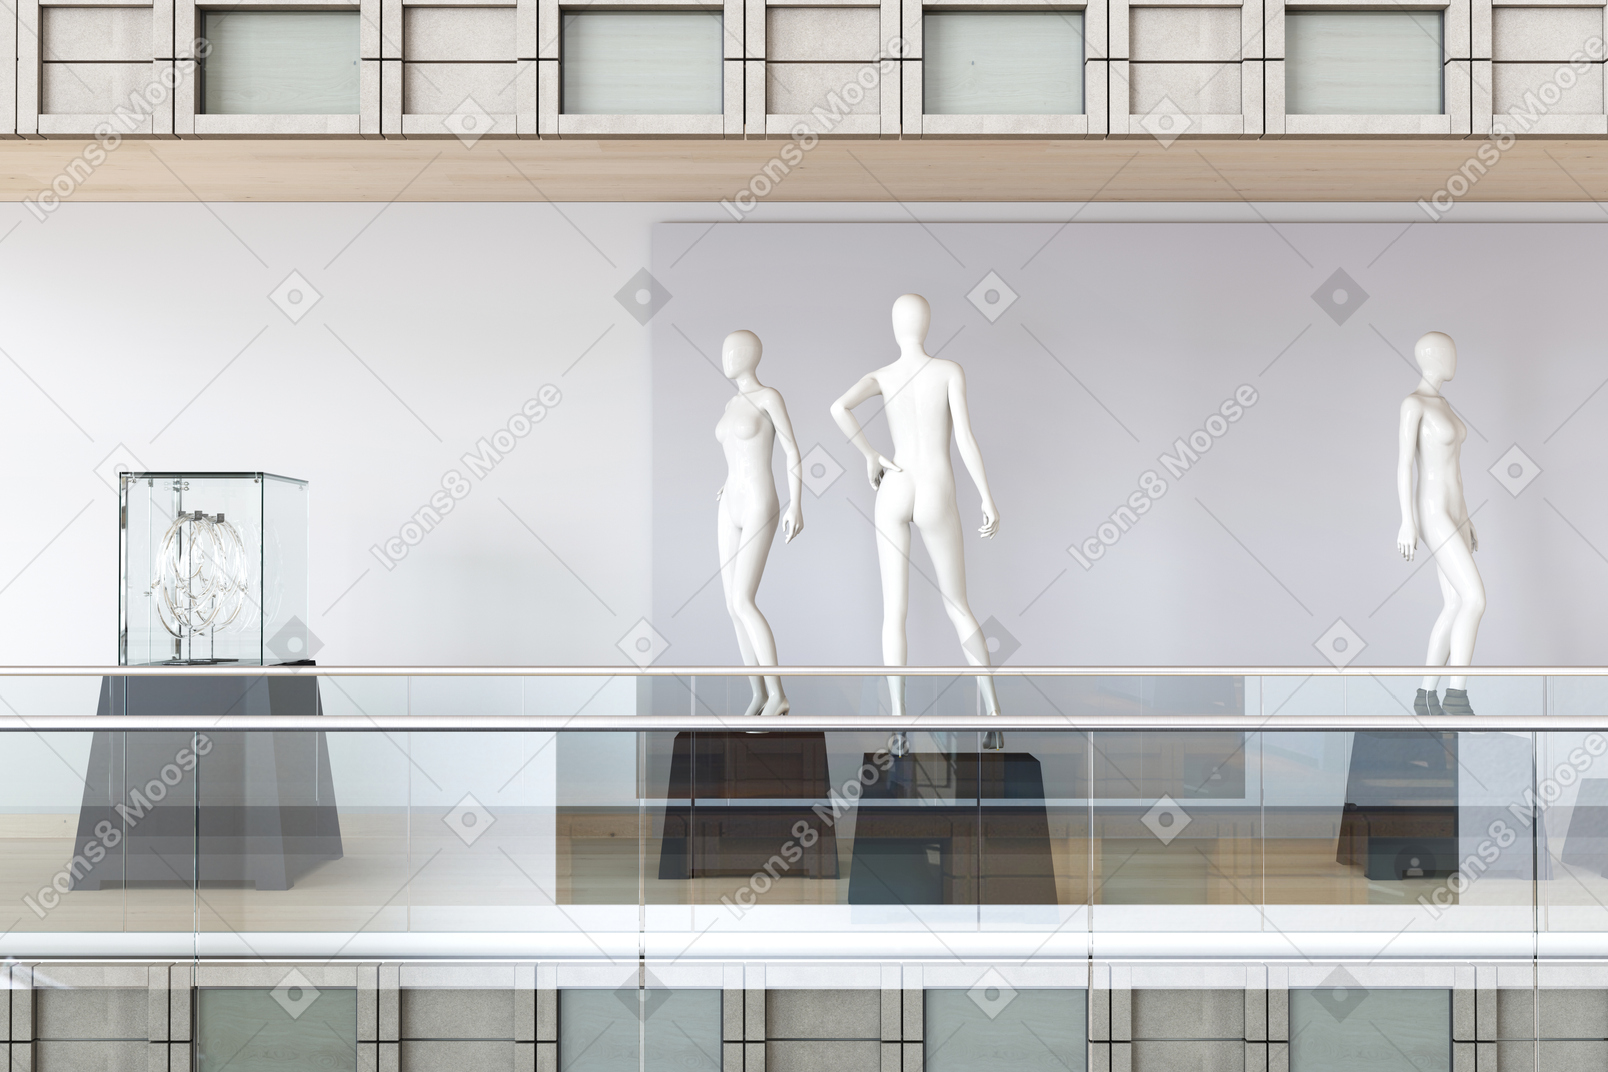 White mannequins and display cases with jewellery